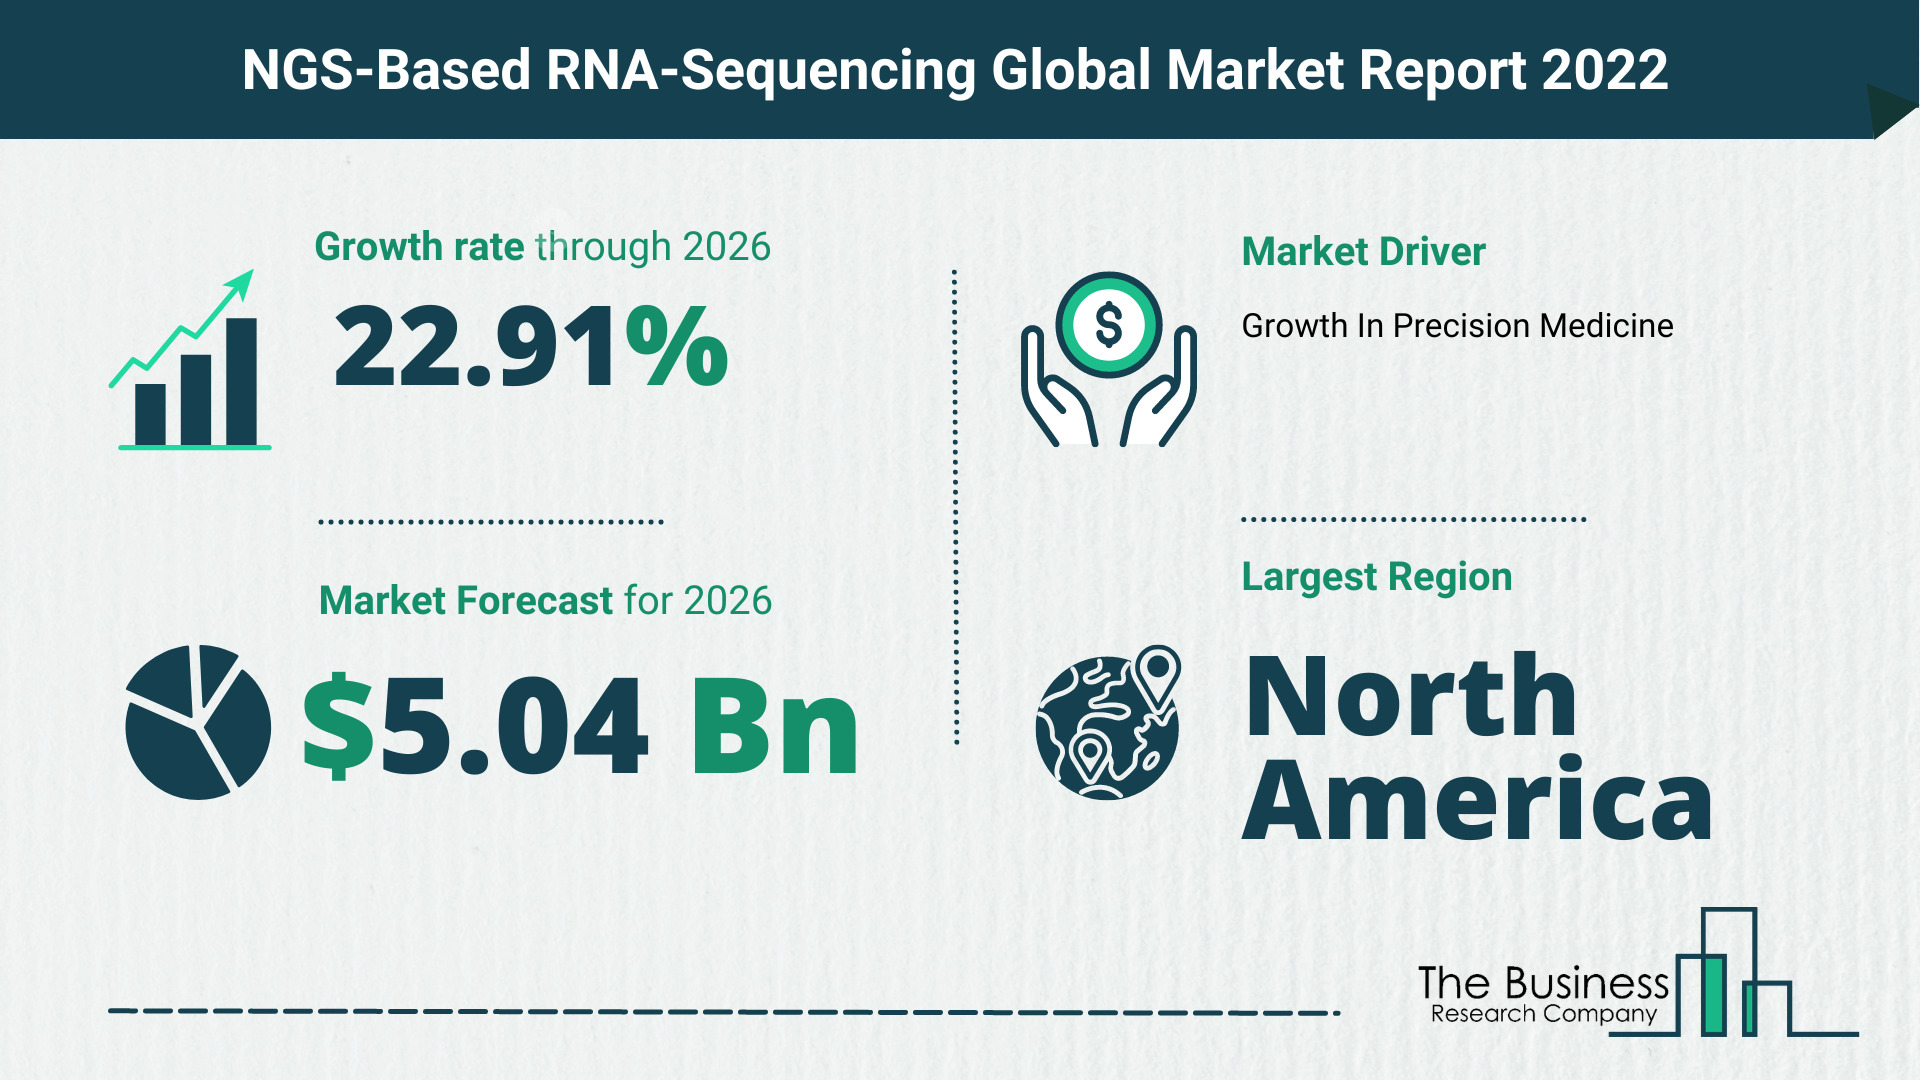 What Is The NGS-Based RNA-Sequencing Market Overview In 2022?